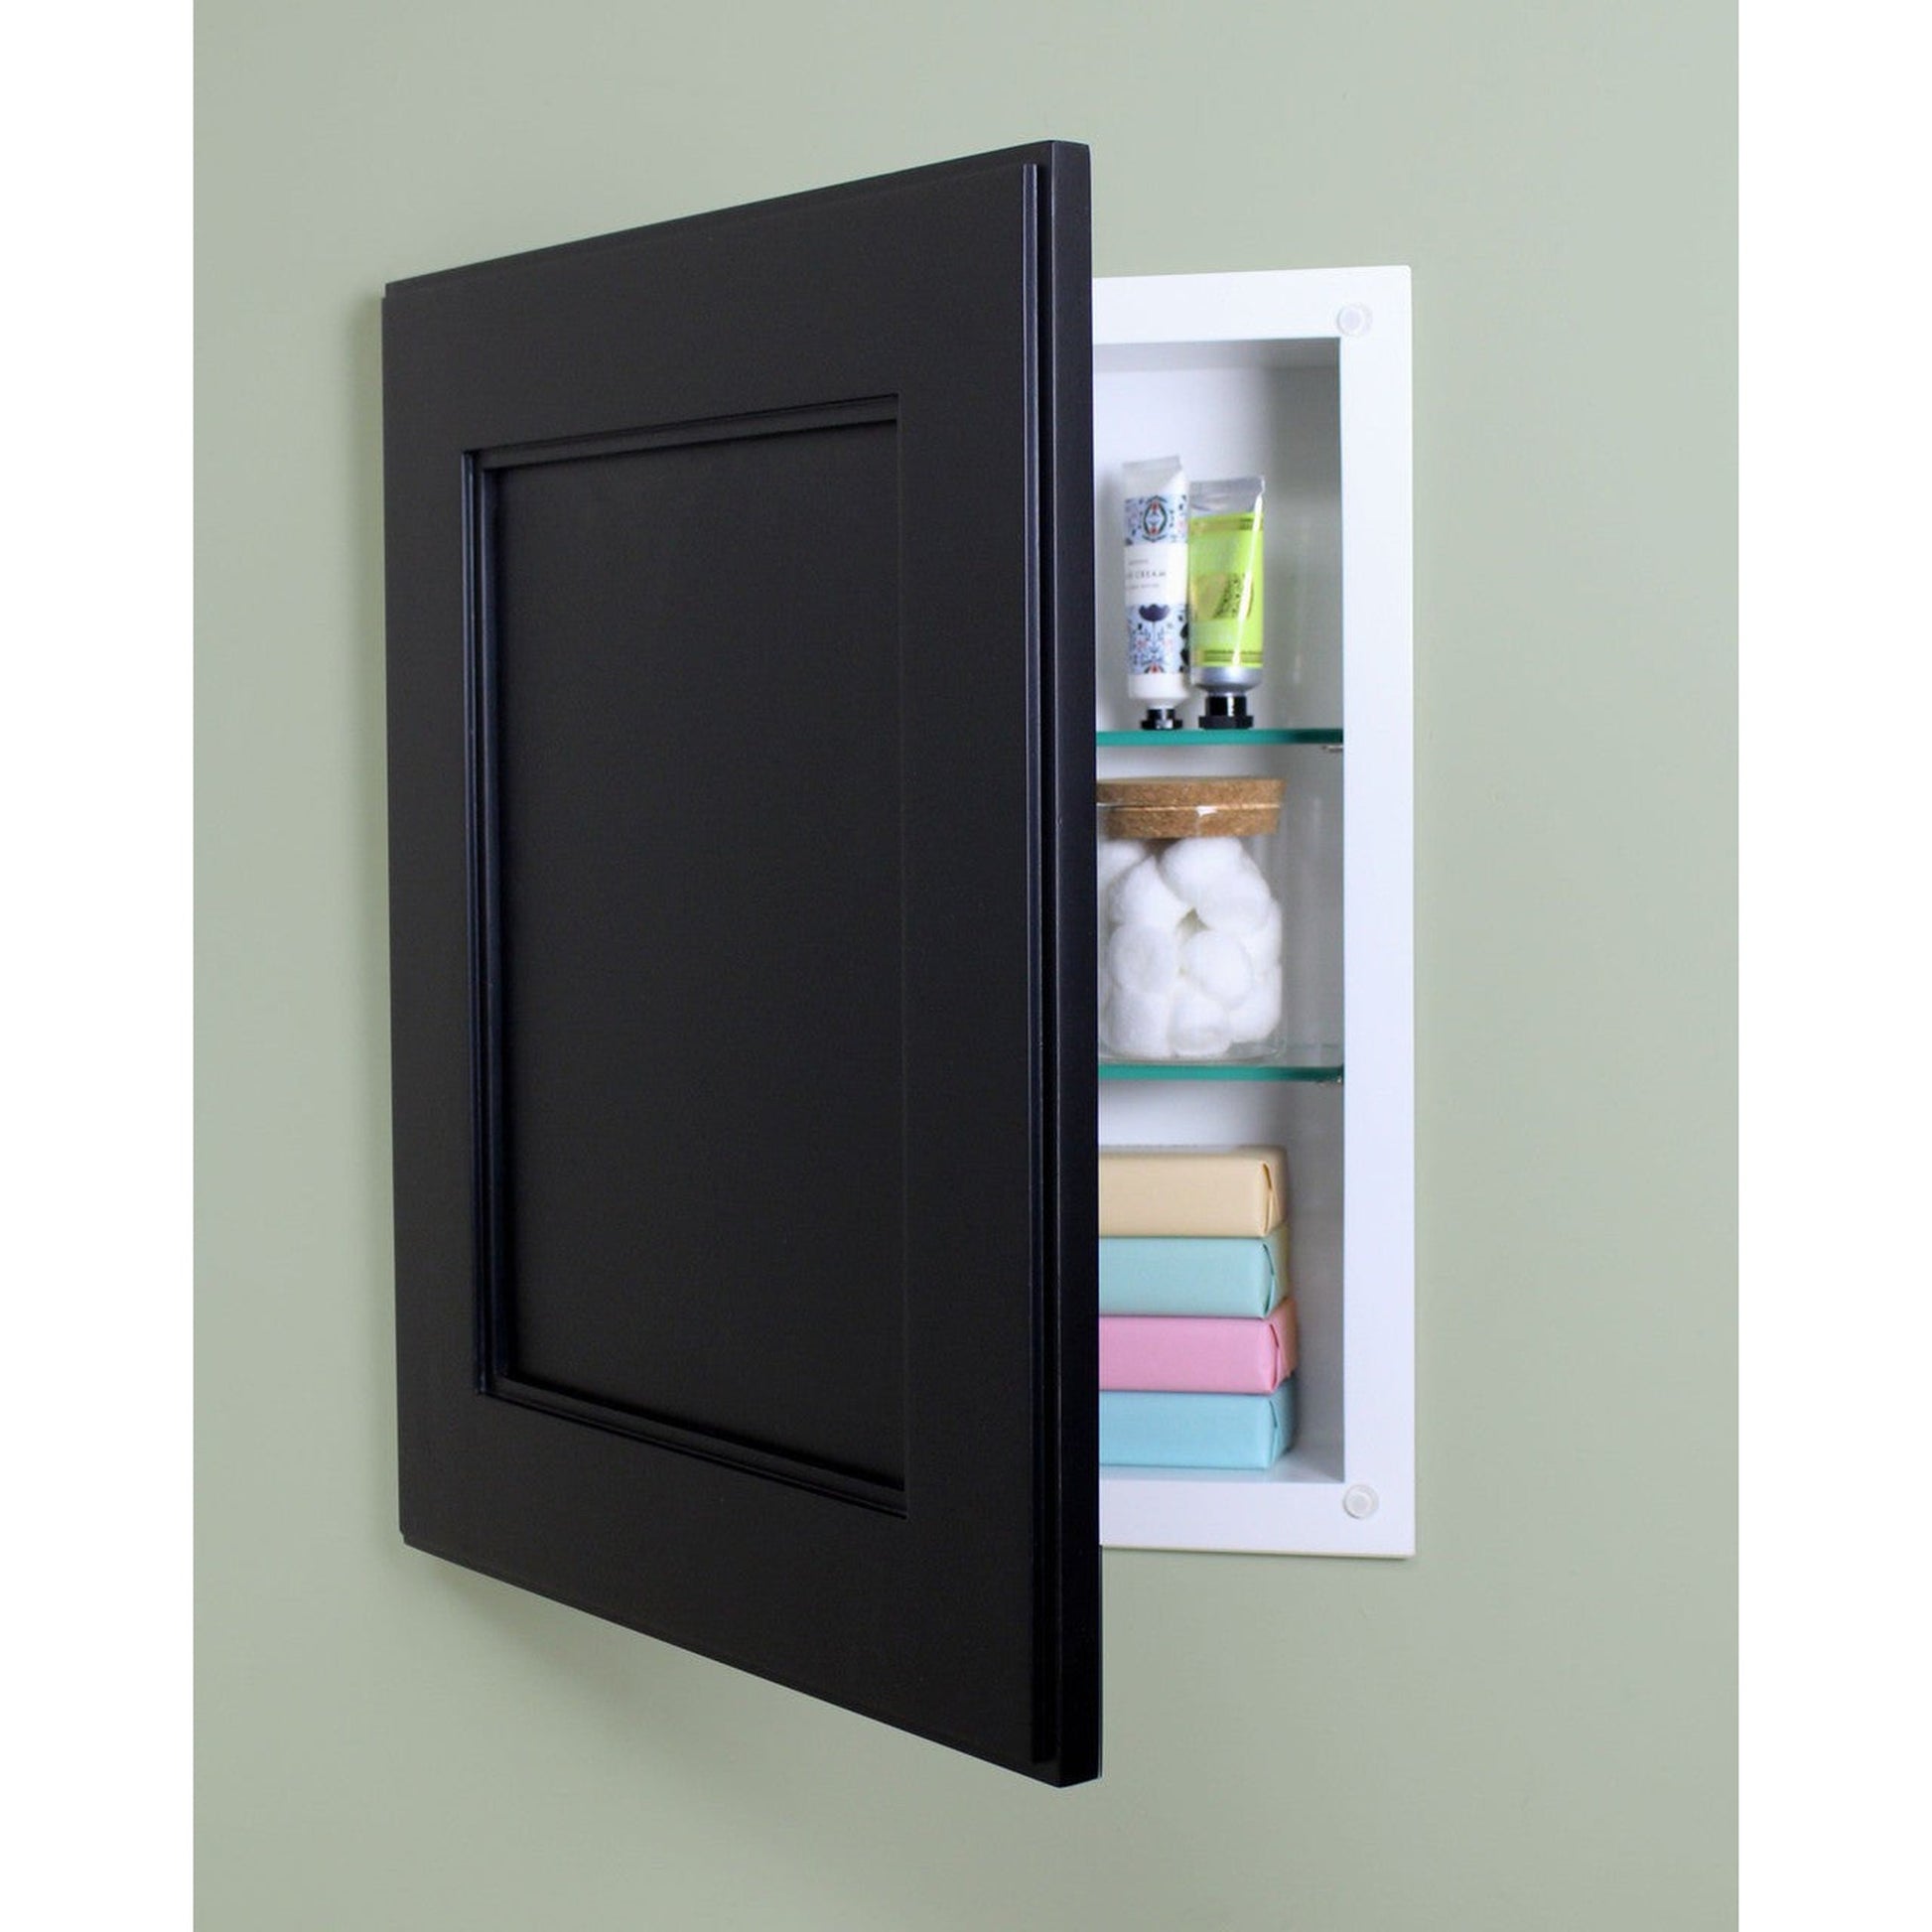 Fox Hollow Furnishings 14" x 18" Black Shaker Style Special 6" Depth White Interior Recessed Medicine Cabinet With Mirror